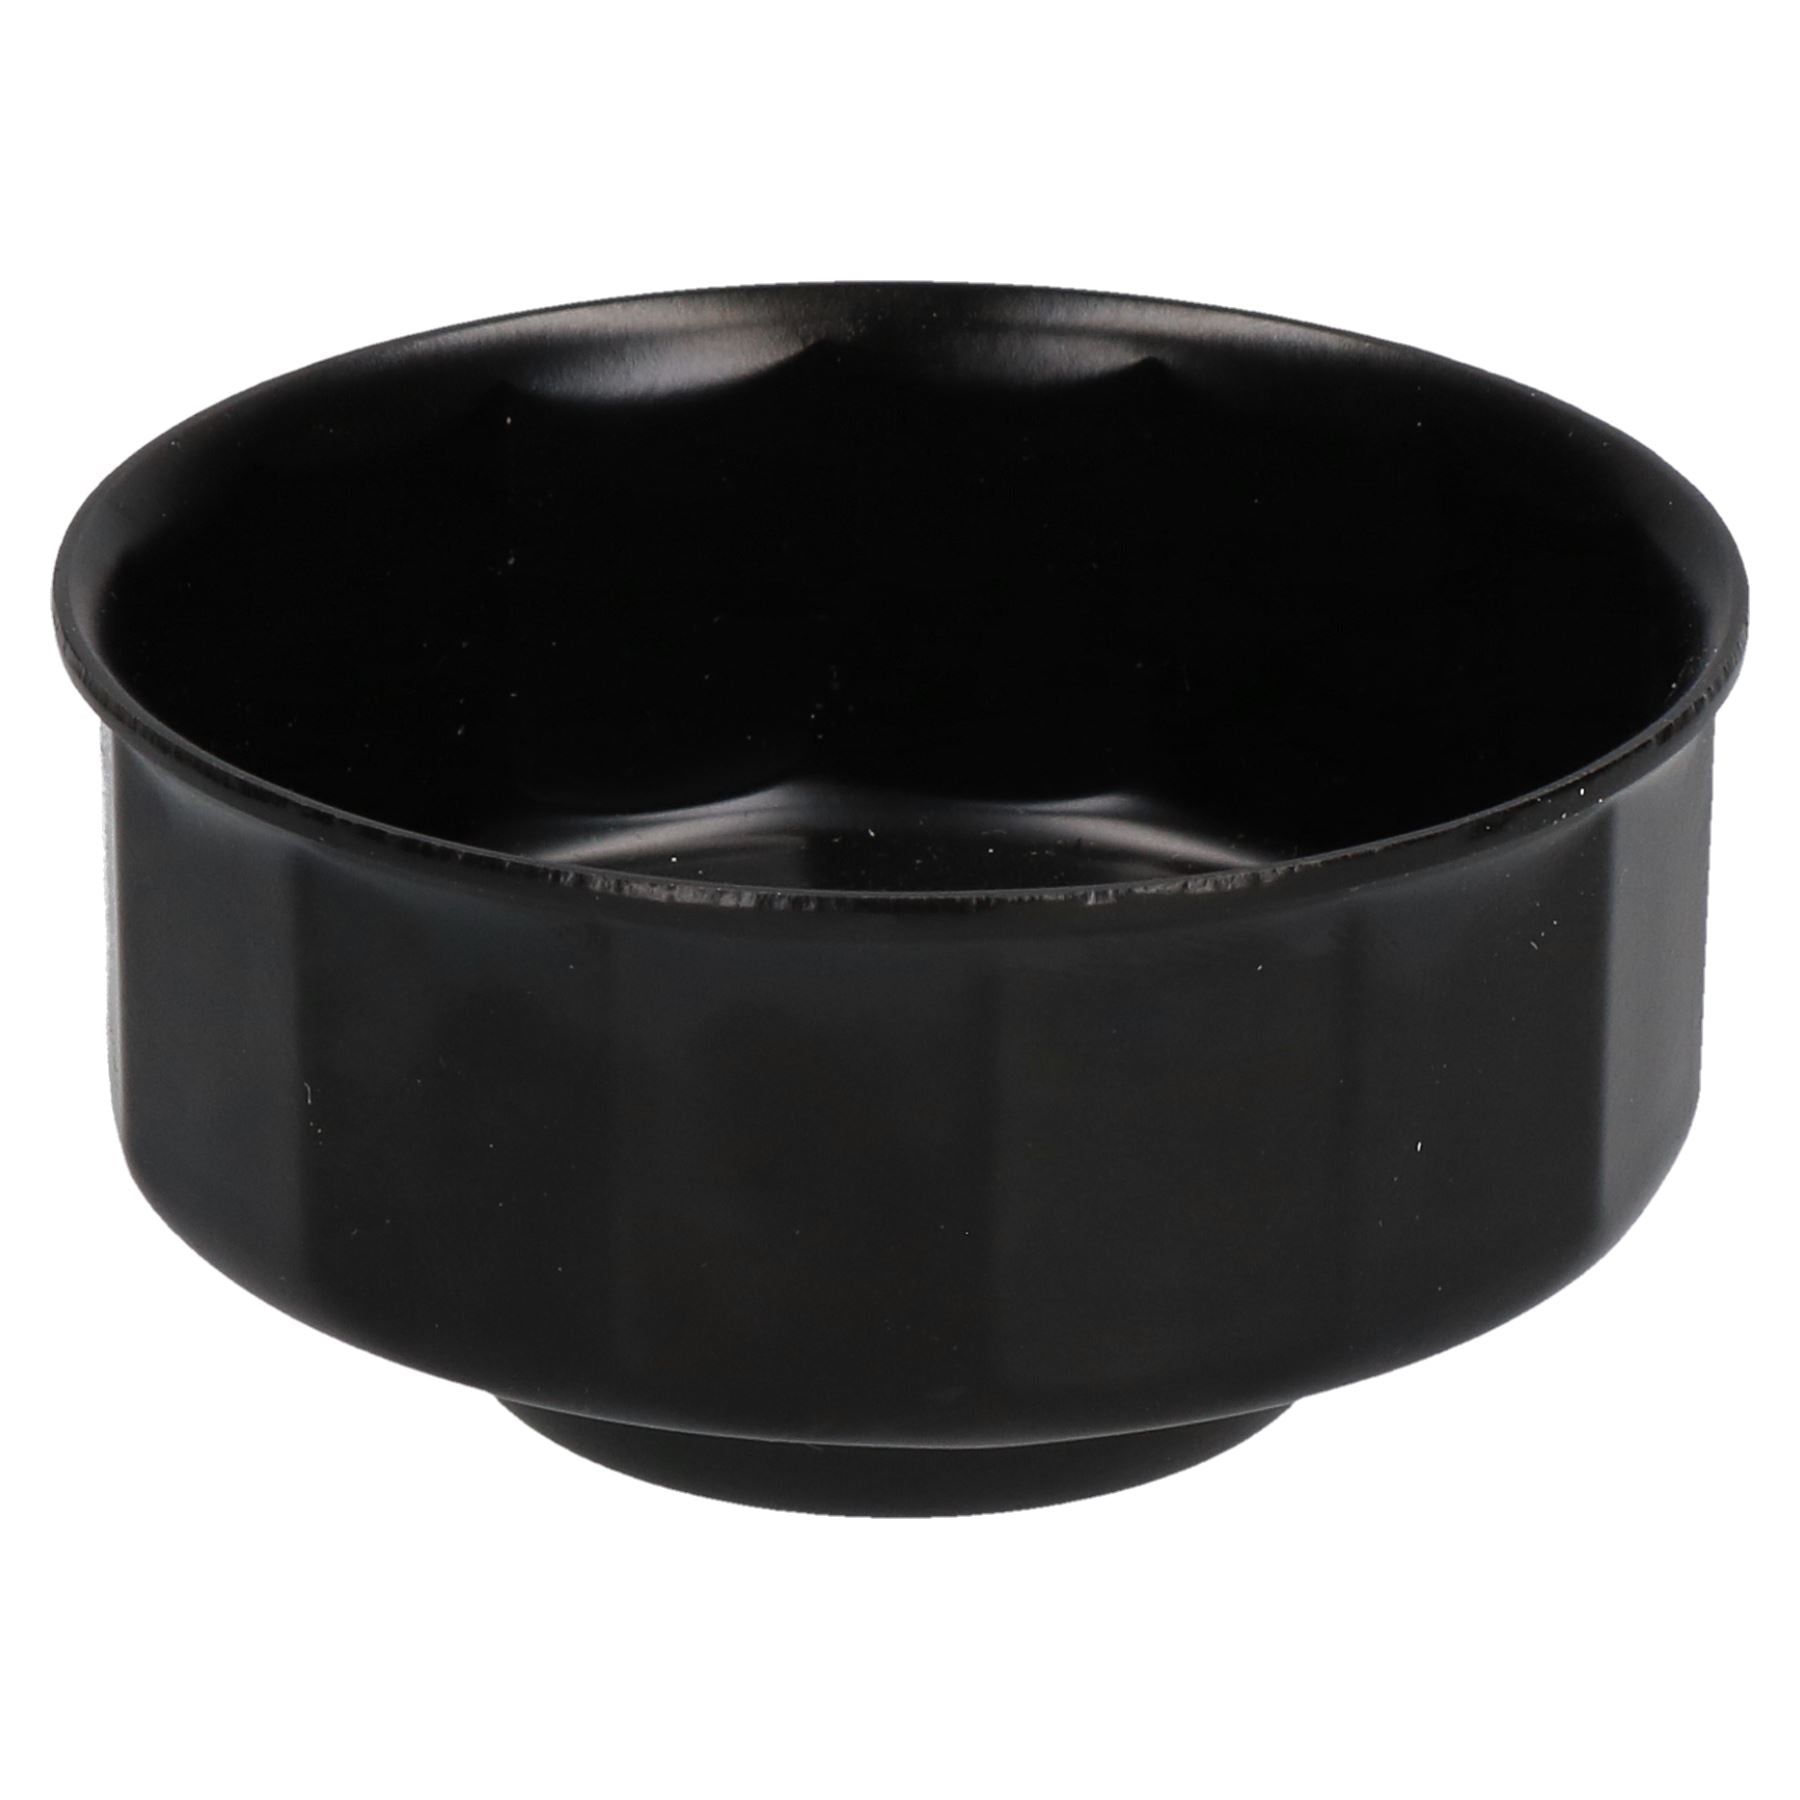 65mm 14 Flute Cup type Oil Filter Socket Remover For Most Japanese Engines